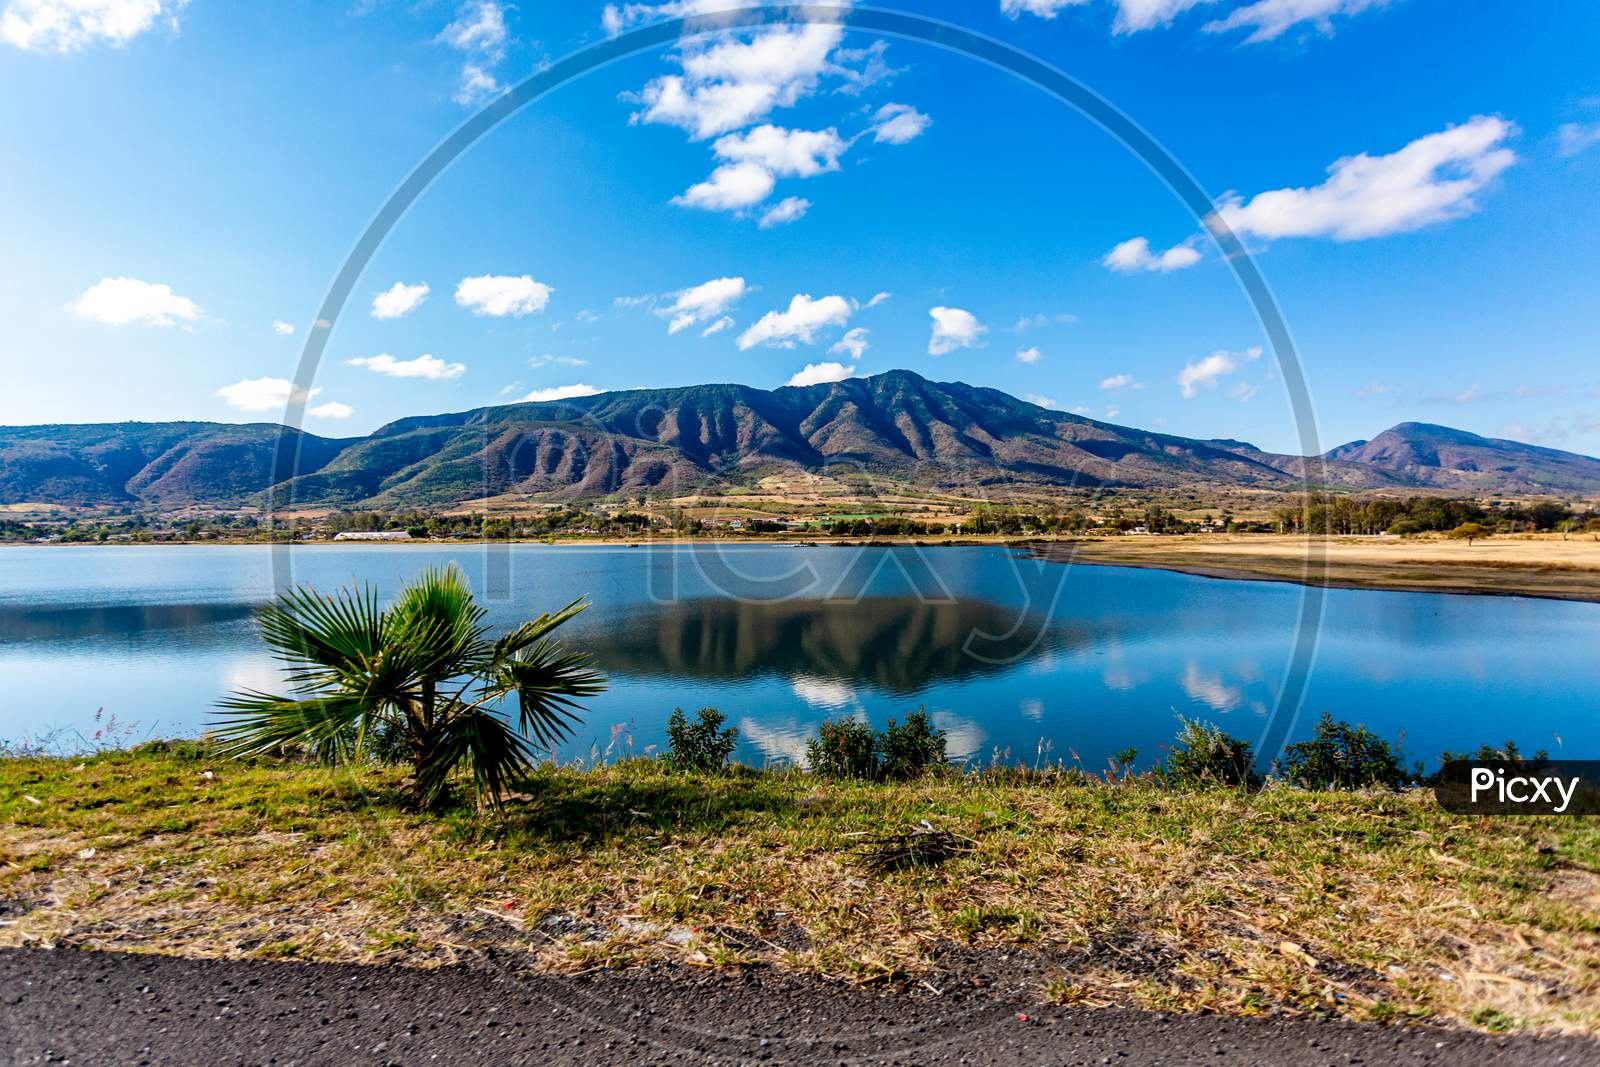 Mexican Mountainous Landscape, A Small Palm Tree Next To A Lake With Mirror Reflection Along The Guadalajara - Chapala Highway Surrounded By Arid Terrain And Trees, Sunny Day In Jalisco, Mexico